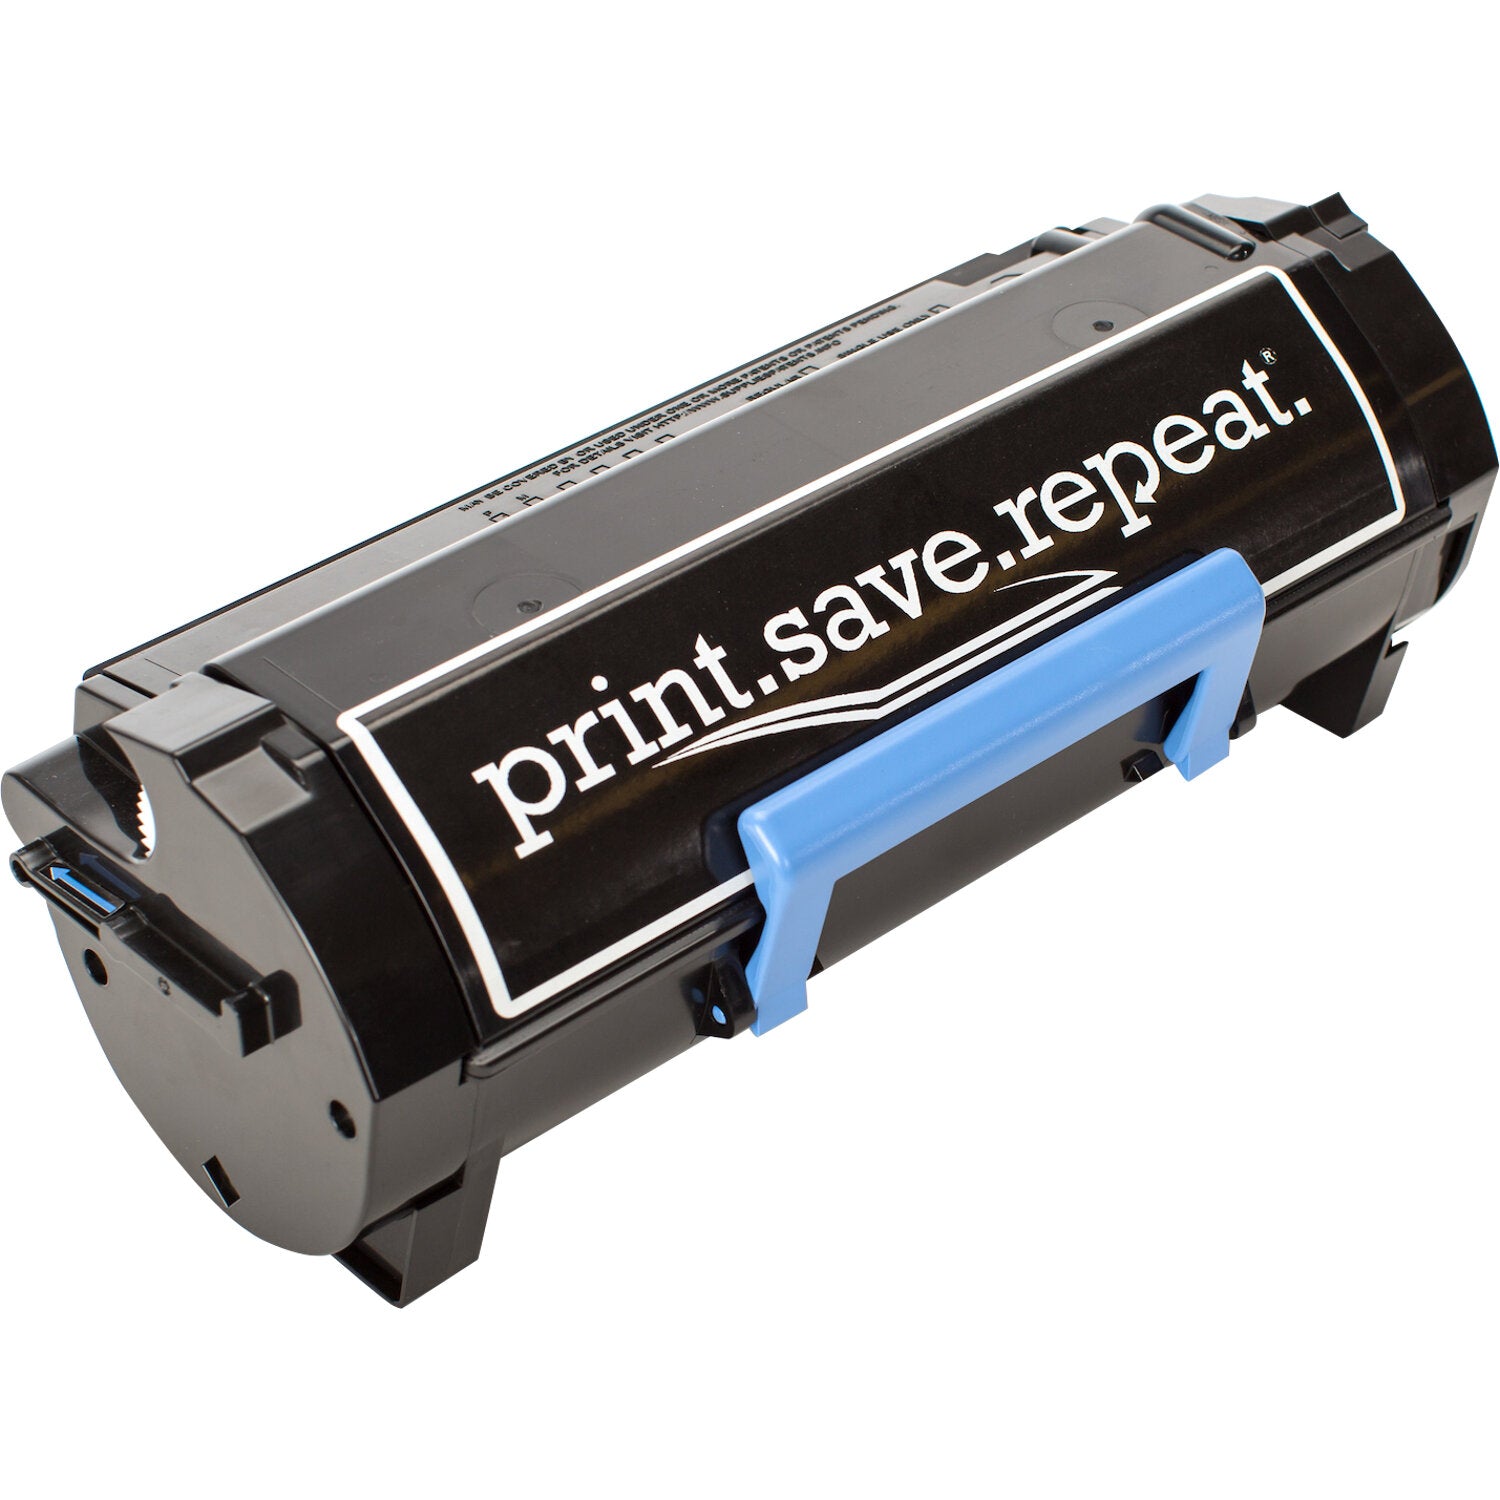 Print.Save.Repeat. Dell DJMKY Extra High Yield Remanufactured Toner Cartridge for B3465 [20,000 Pages]